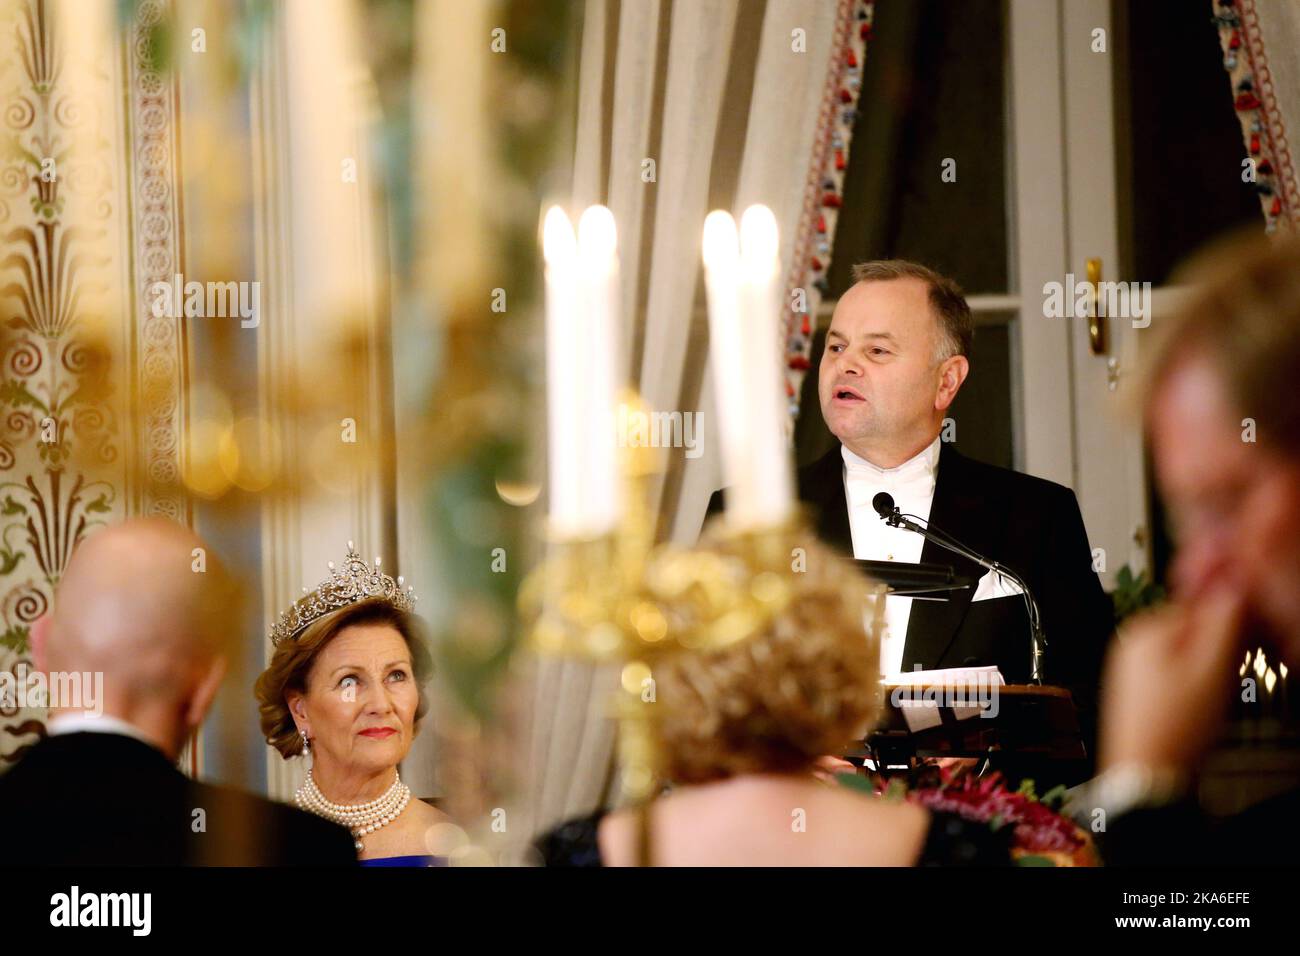 Oslo 20151022. Parliamentary President Olemic Thommessen (H) gives a speech during the parliamentary dinner at the Royal Palace, on Thursday night. POOL Photo: Berit Roald / NTB scanpix [LANUAGESEPARATOR] Oslo 20151022. Stortingspresident Olemic Thommessen (H) holder tale under Stortingsmiddagen pa Slottet, torsdag kveld. POOL Foto: Berit Roald / NTB scanpix  Stock Photo